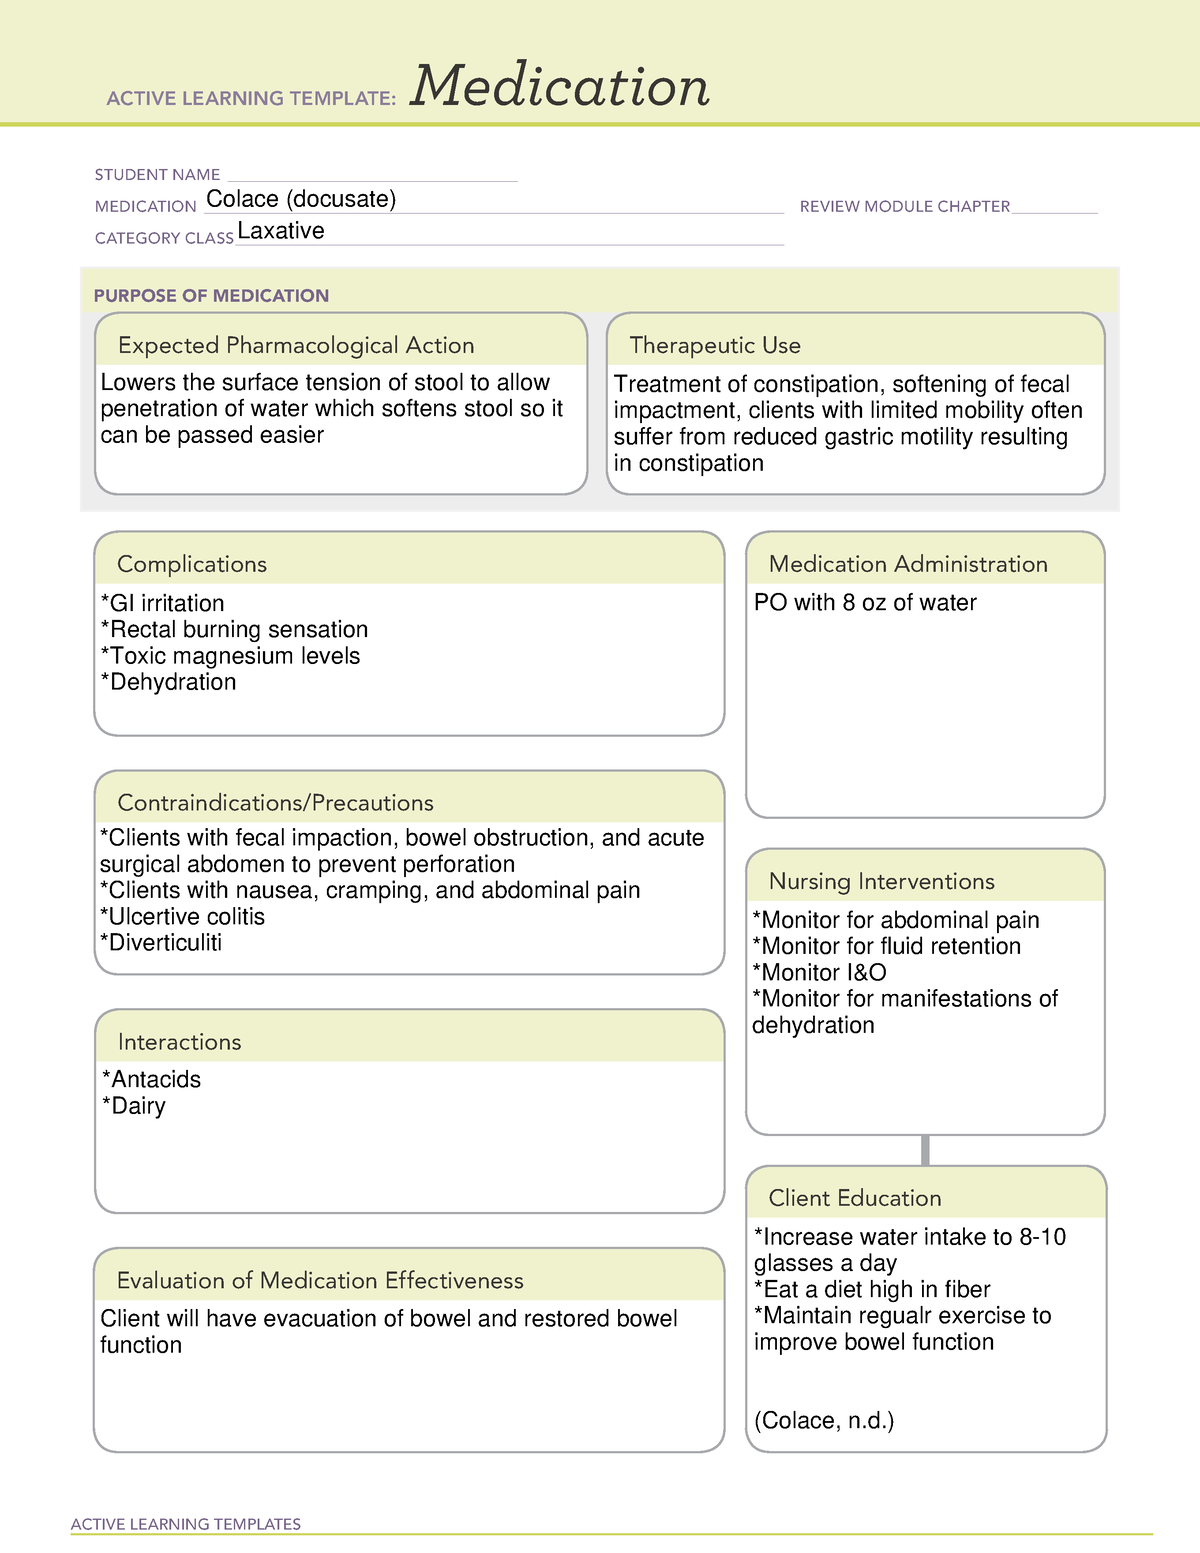 ATI Medication Template Colace dulcosate ACTIVE LEARNING TEMPLATES